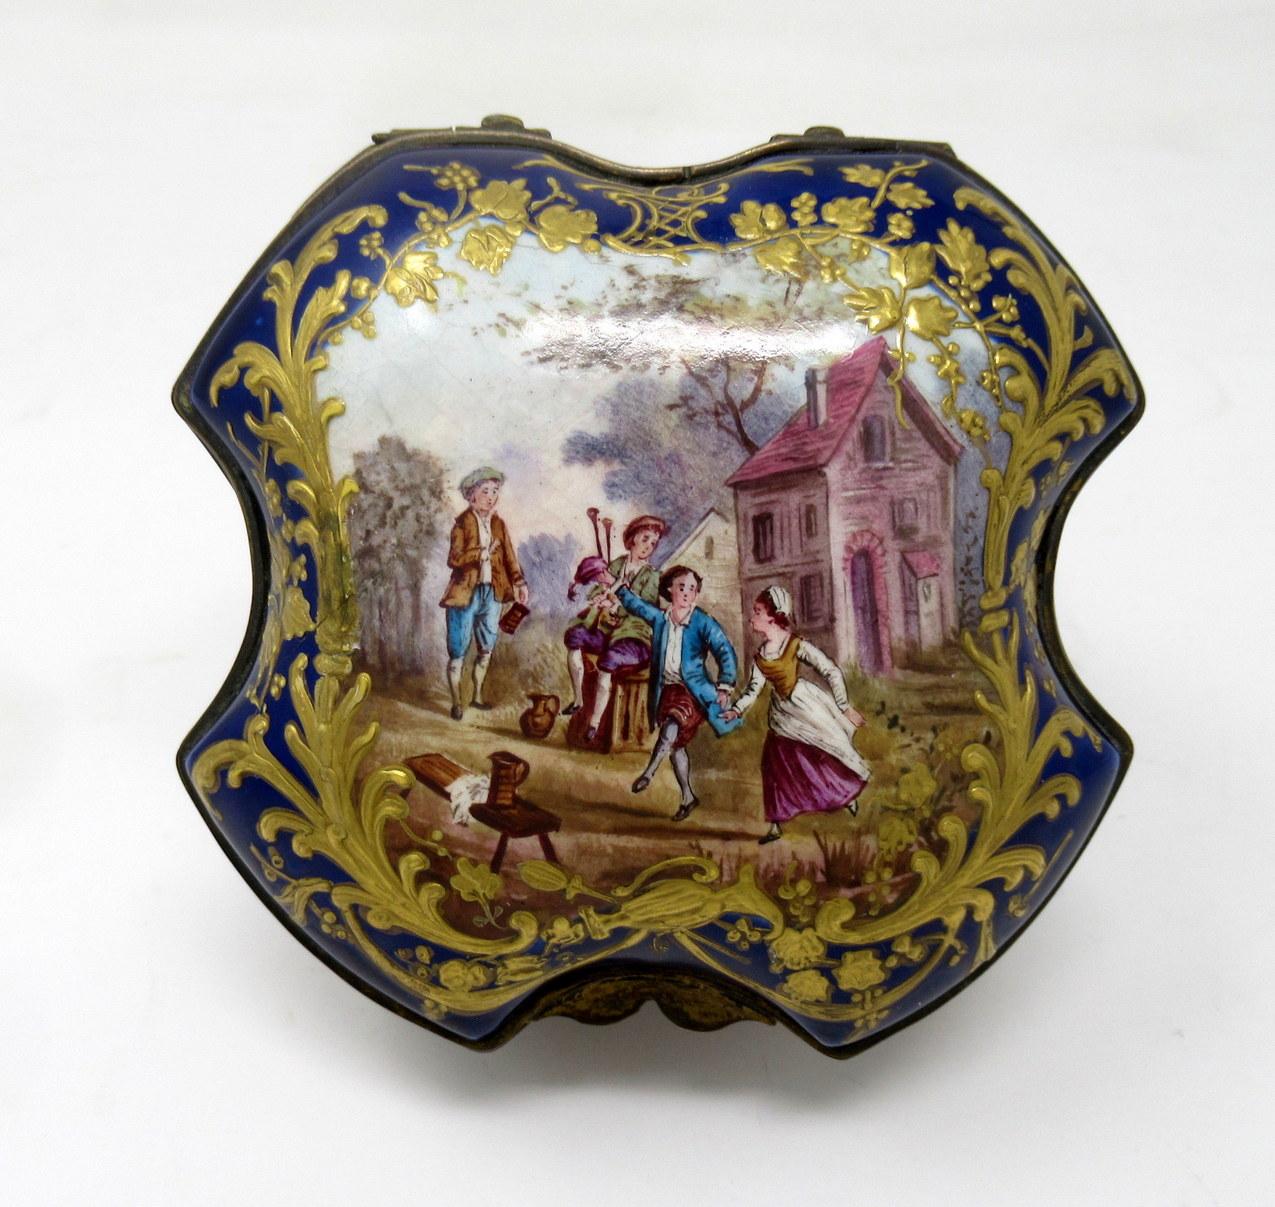 A very fine quality French hand decorated ladies jewlery casket or dresser box of outstanding Museum Quality, and of square shaped outline with all four inverted sides, mid to late Nineteenth Century, possibly by Samson Paris after Sevres. 

The